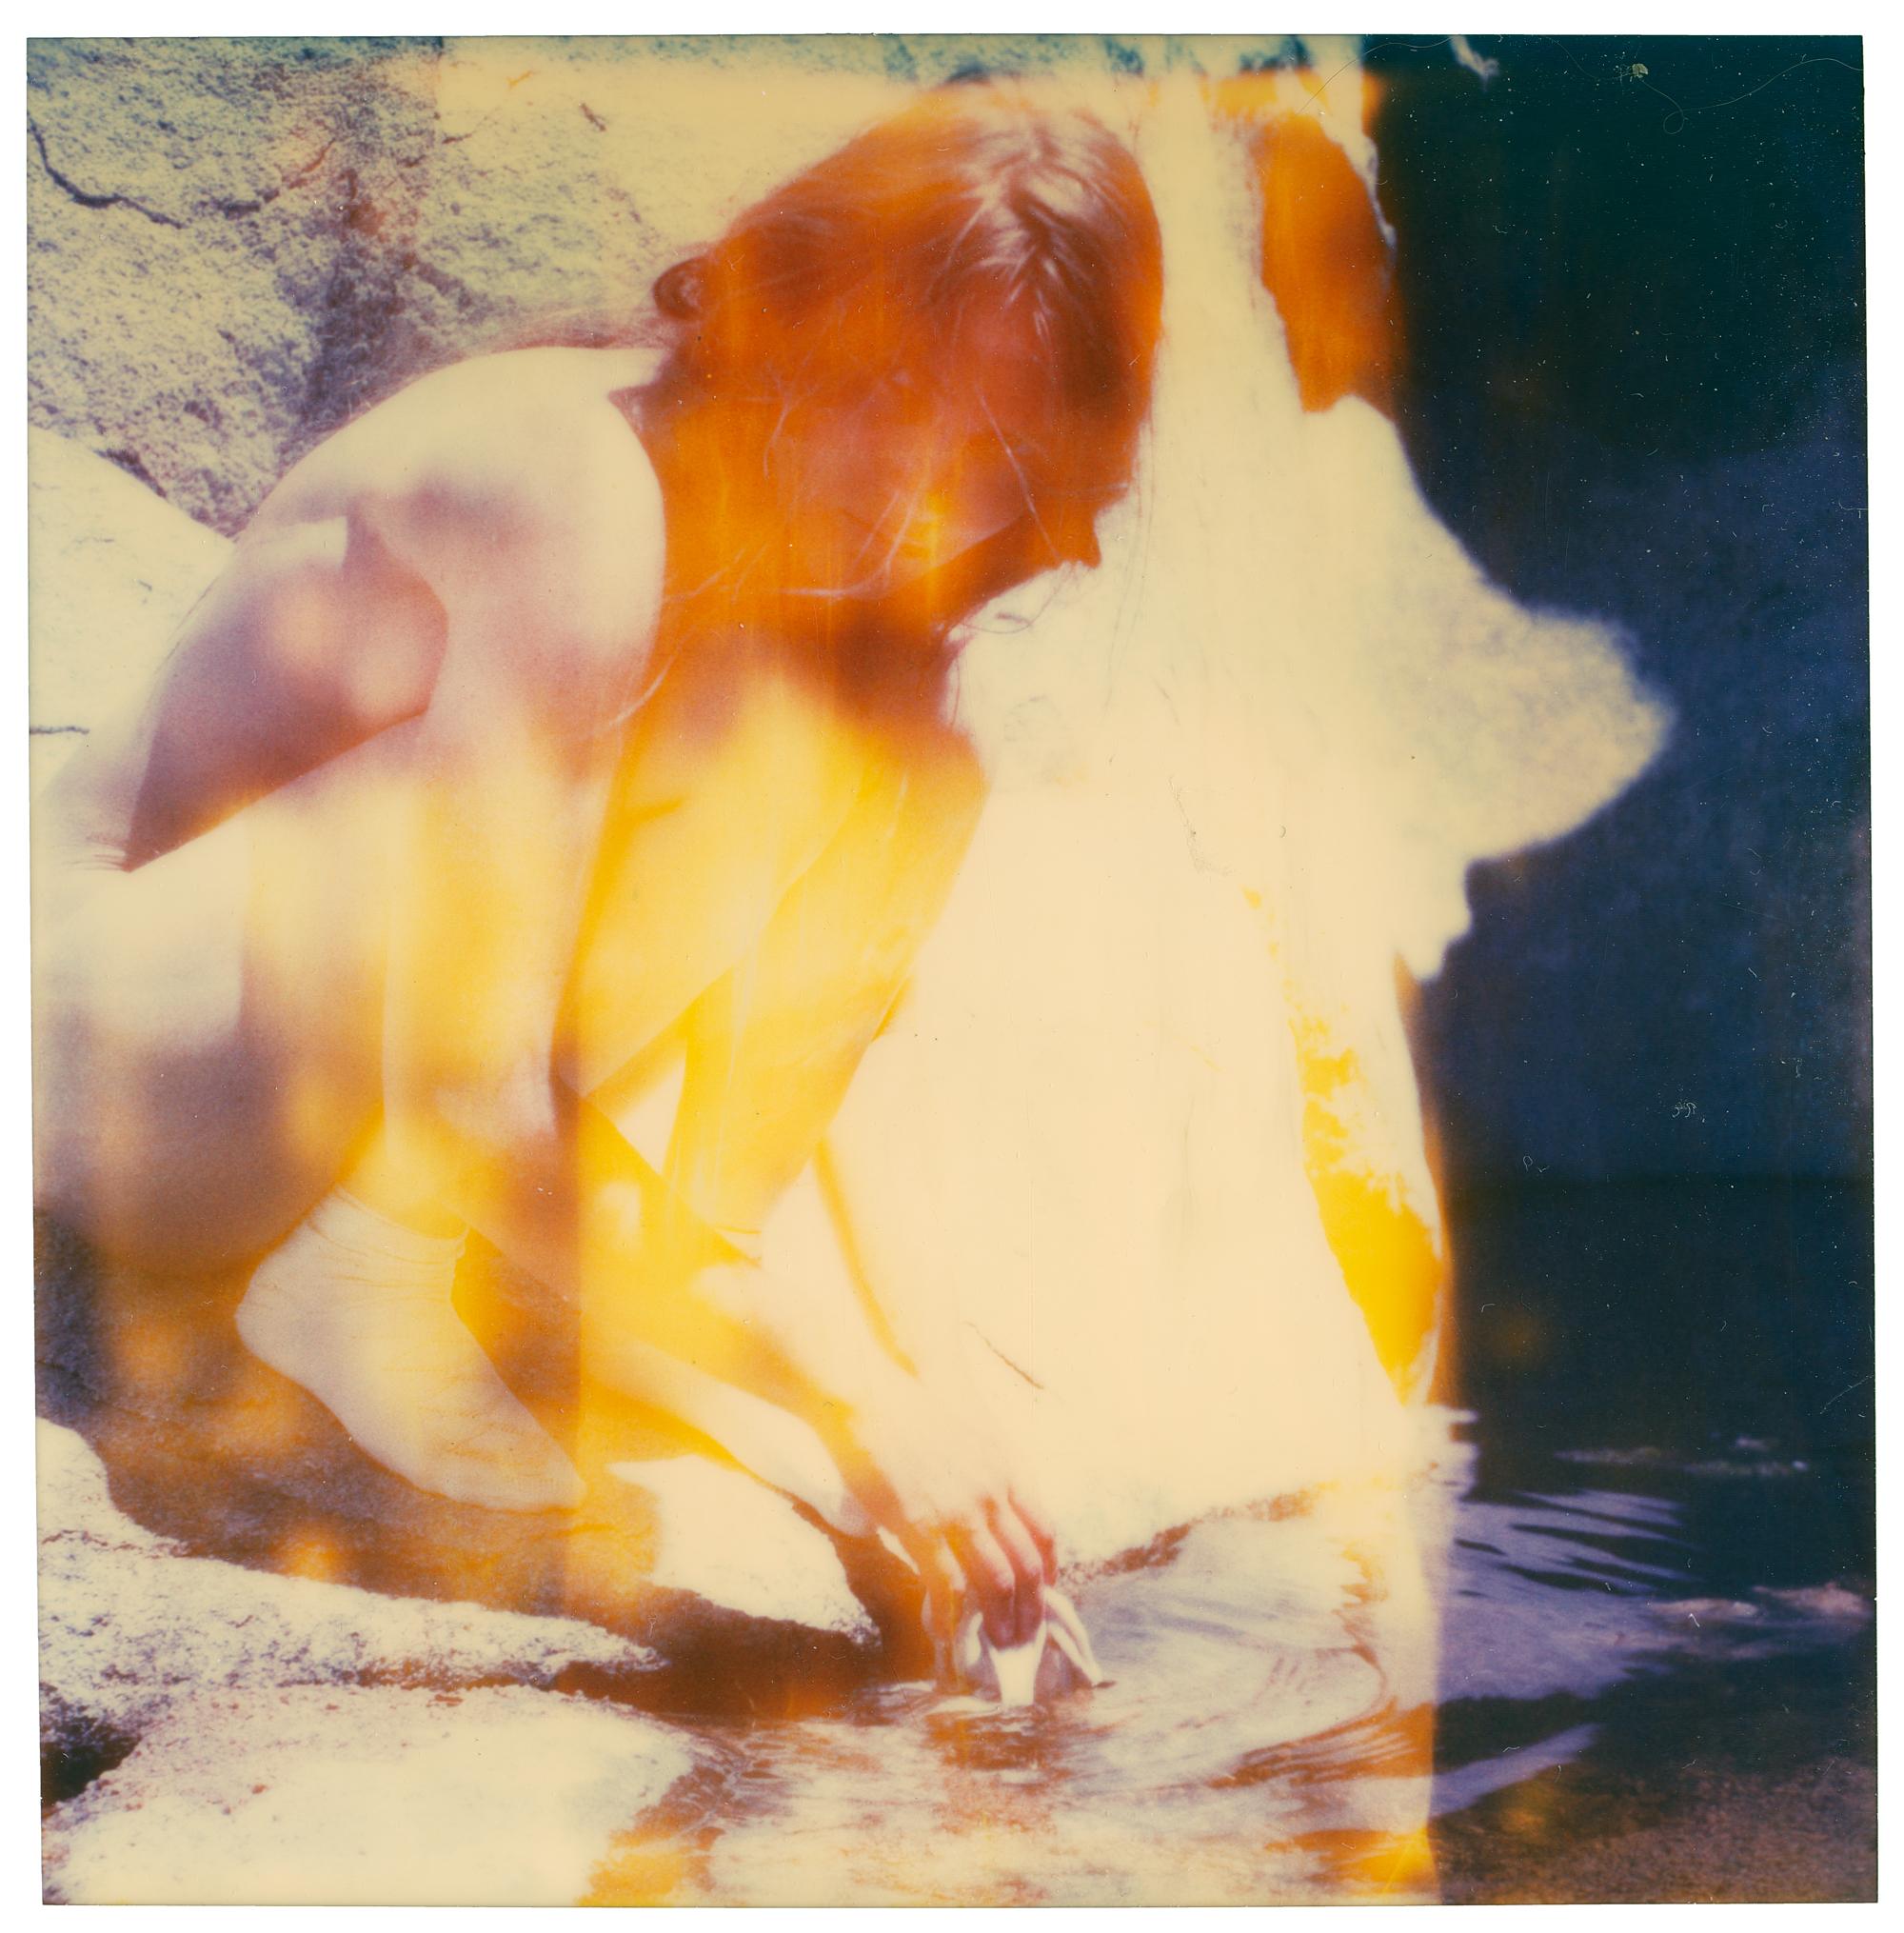 Stefanie Schneider Abstract Photograph - The Girl - Planet of the Apes 09 - 21st Century, Polaroid, Abstract